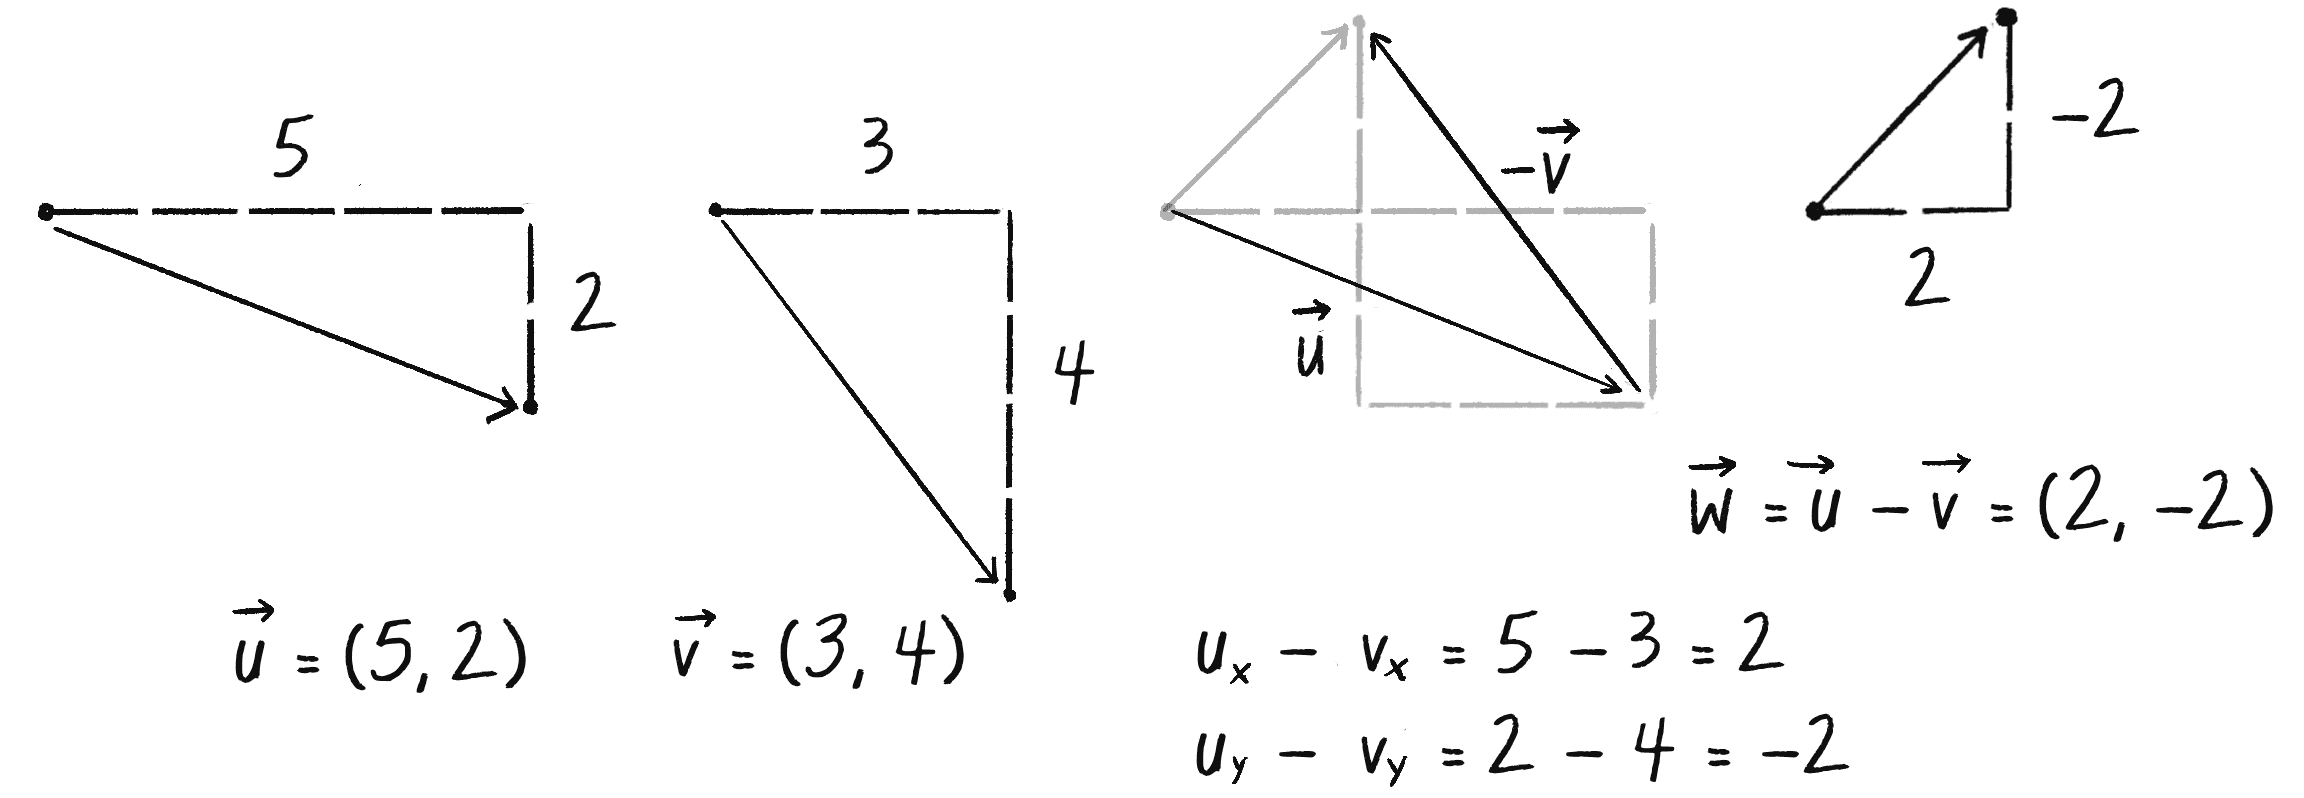 Figure 1.8: Vector subtraction places one vector at the end of another, but pointing in the opposite direction.